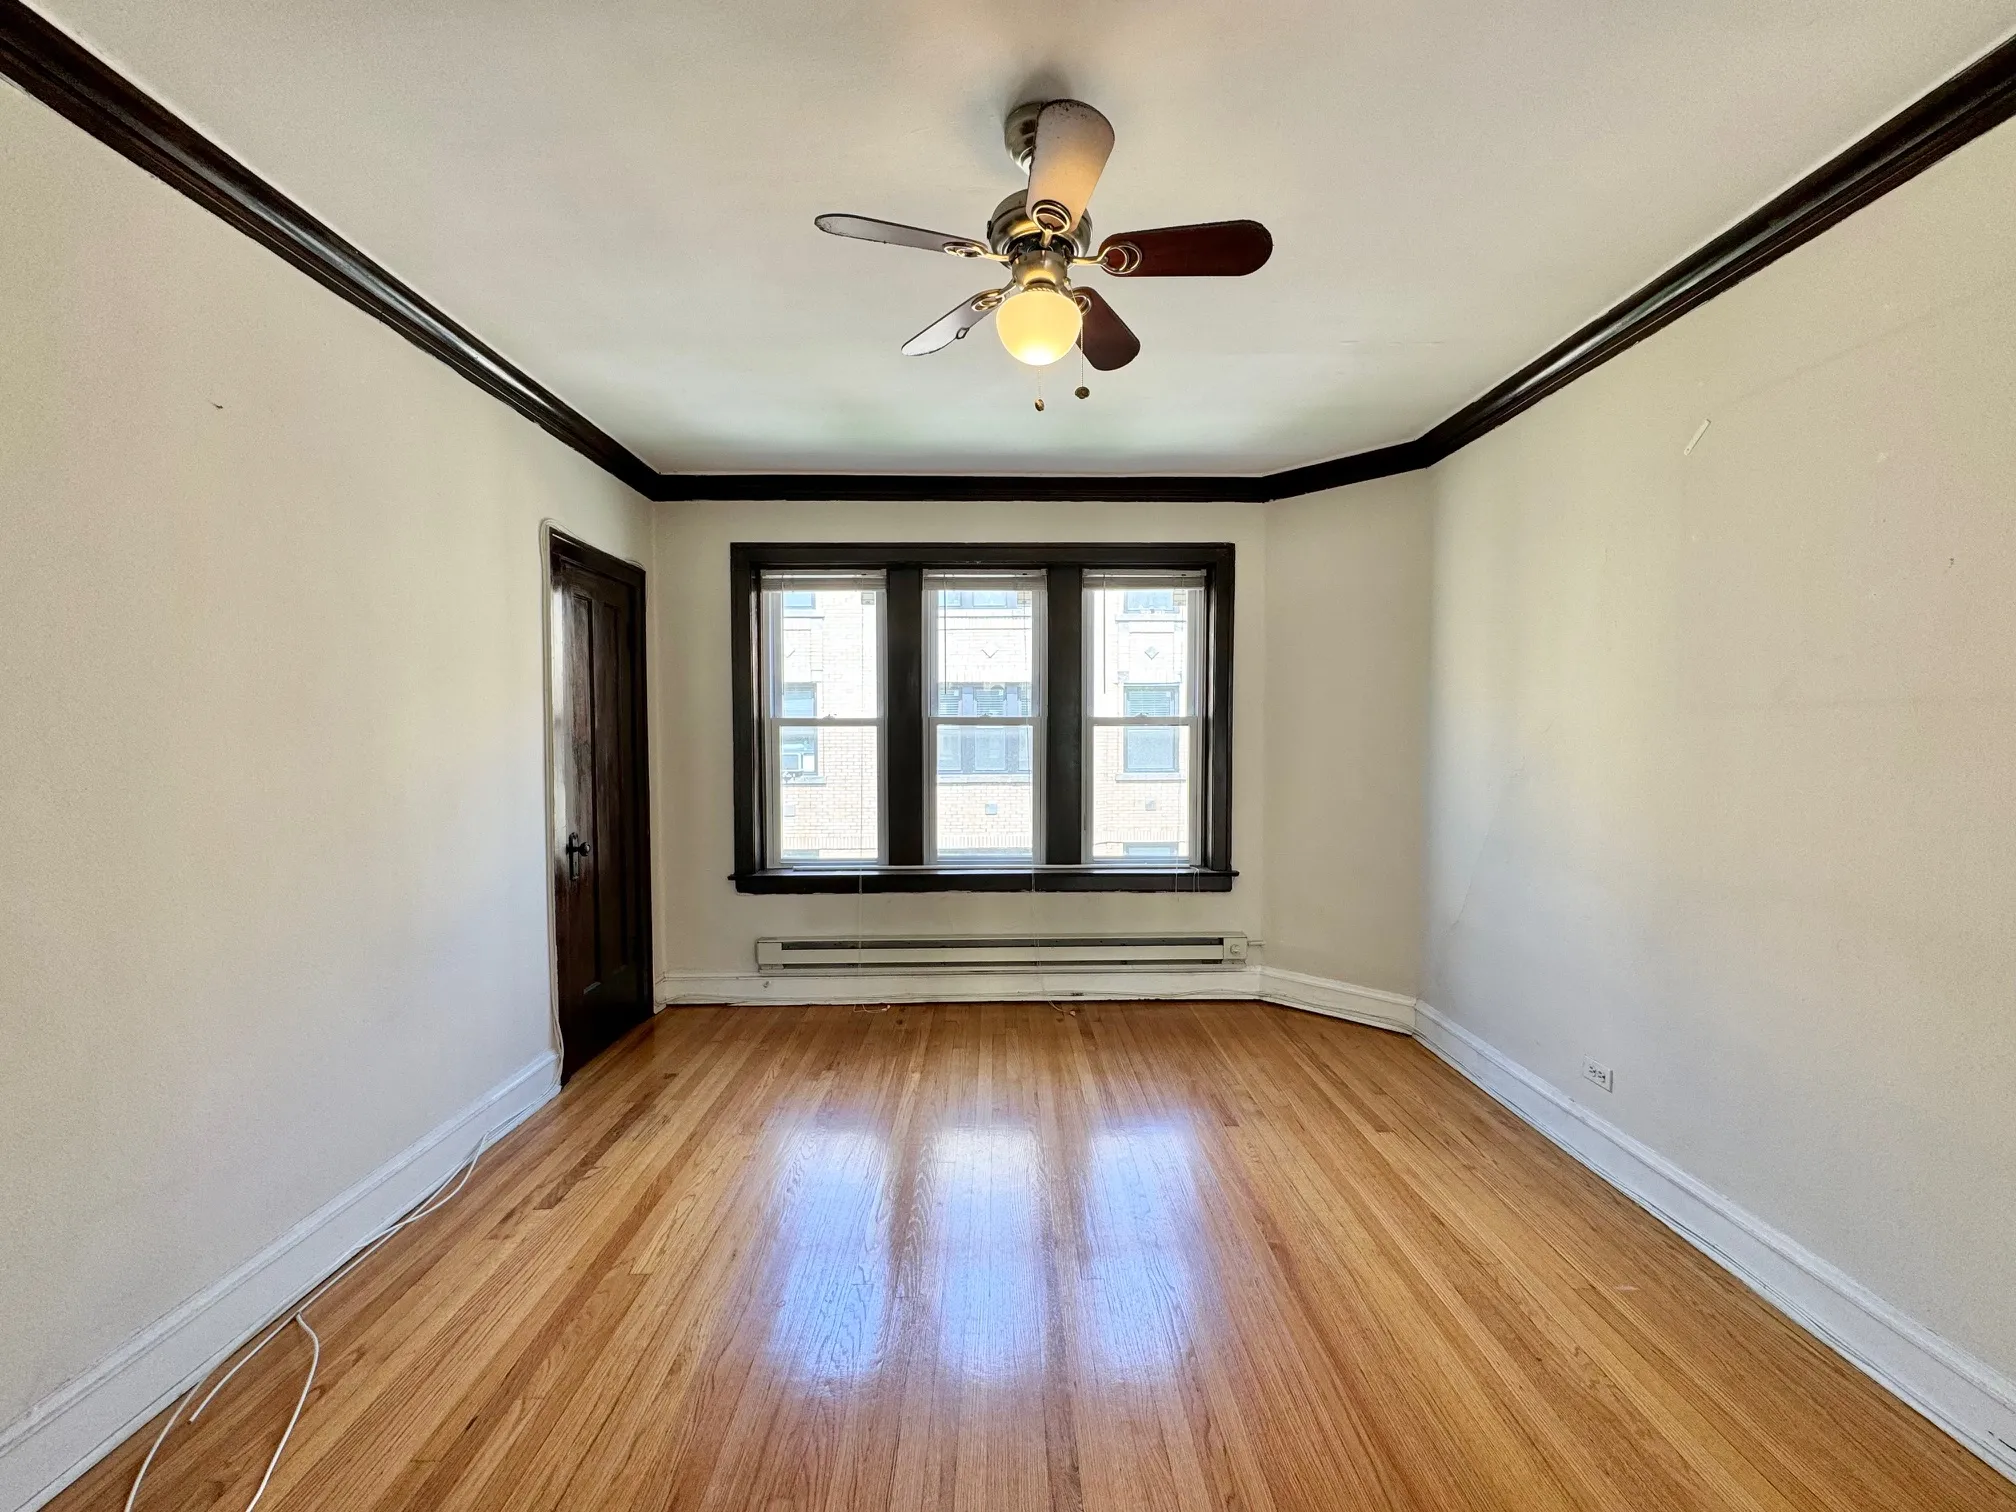 3815 N Greenview Ave 60613 60613-unit#1C-Chicago-IL